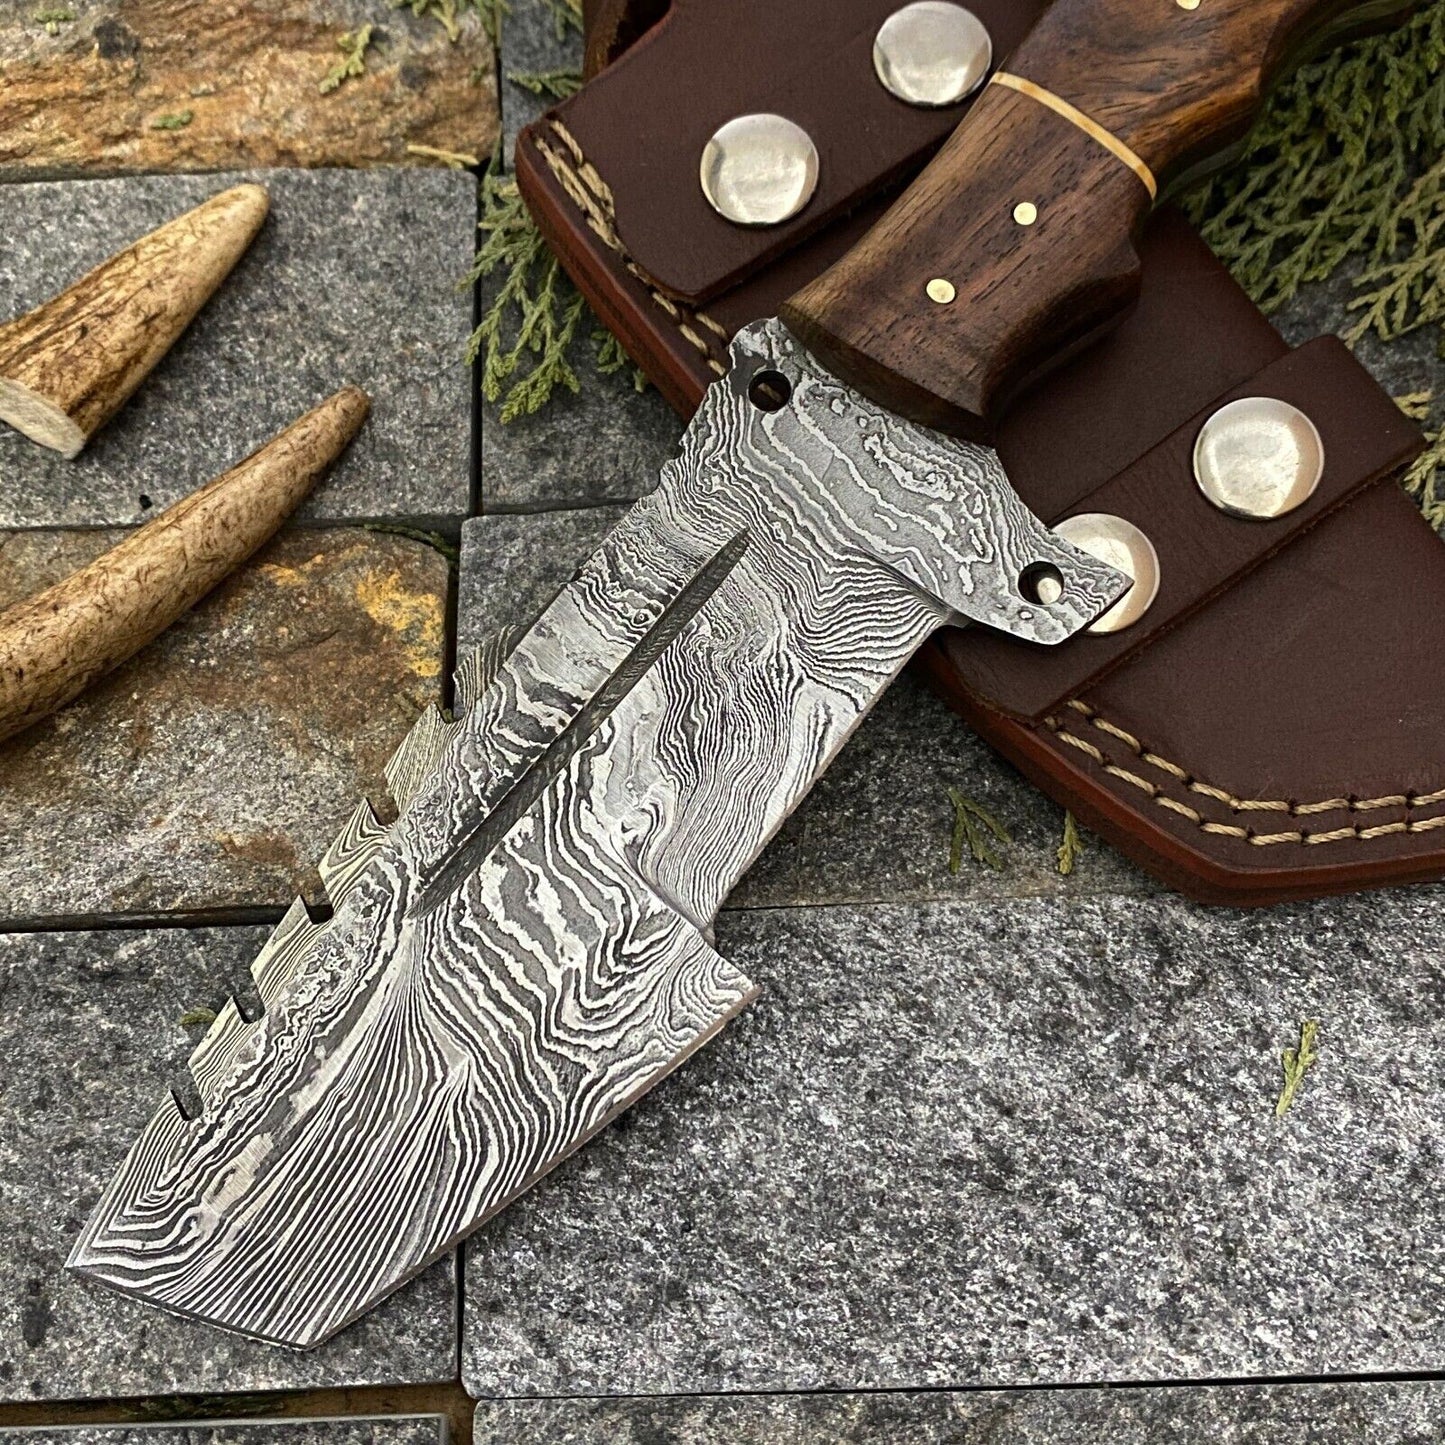 SHARDBLADE HAND FORGED DAMASCUS STEEL CAMPING TRACKER HUNTING KNIFE WITH SHEATH